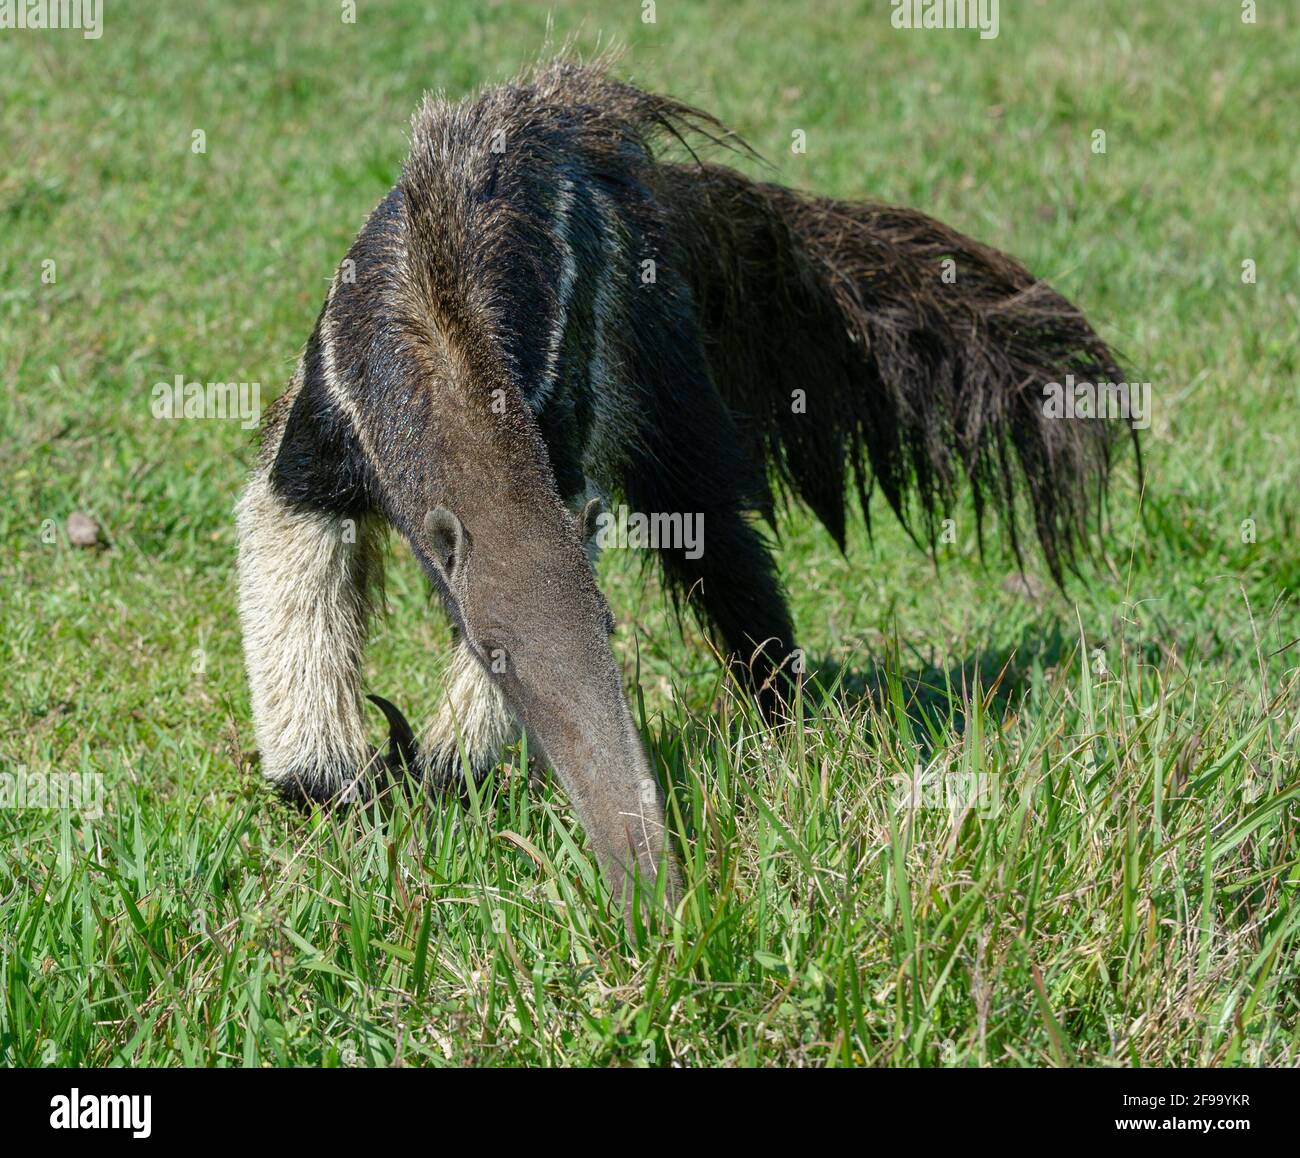 Verschrikking Nadenkend Ophef Giant Anteater looking into the camera - taken with wide angle lens Stock  Photo - Alamy